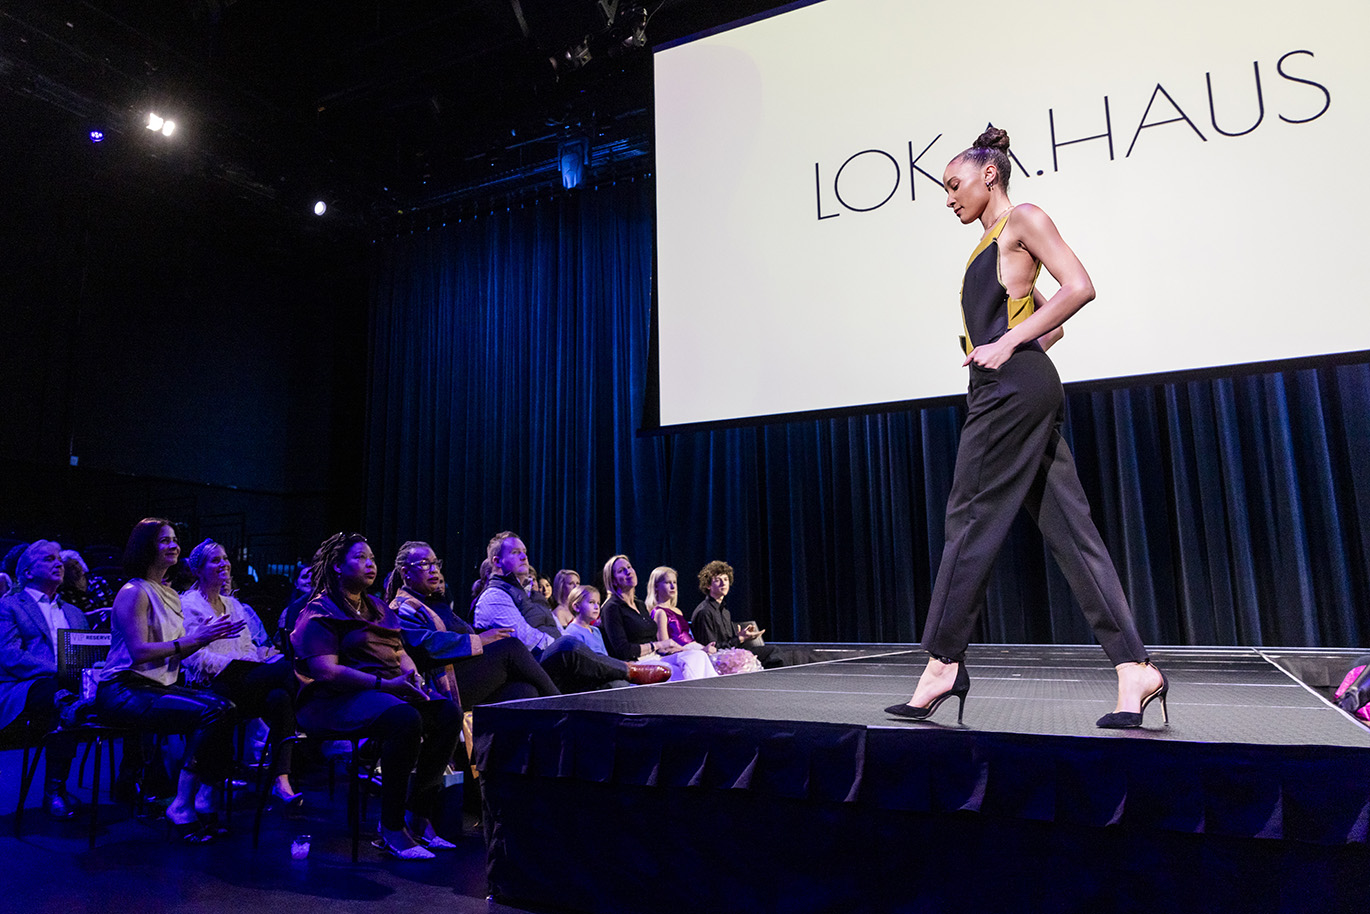 Model in black jumpsuit takes a spin on the runway during the Fashion Show.